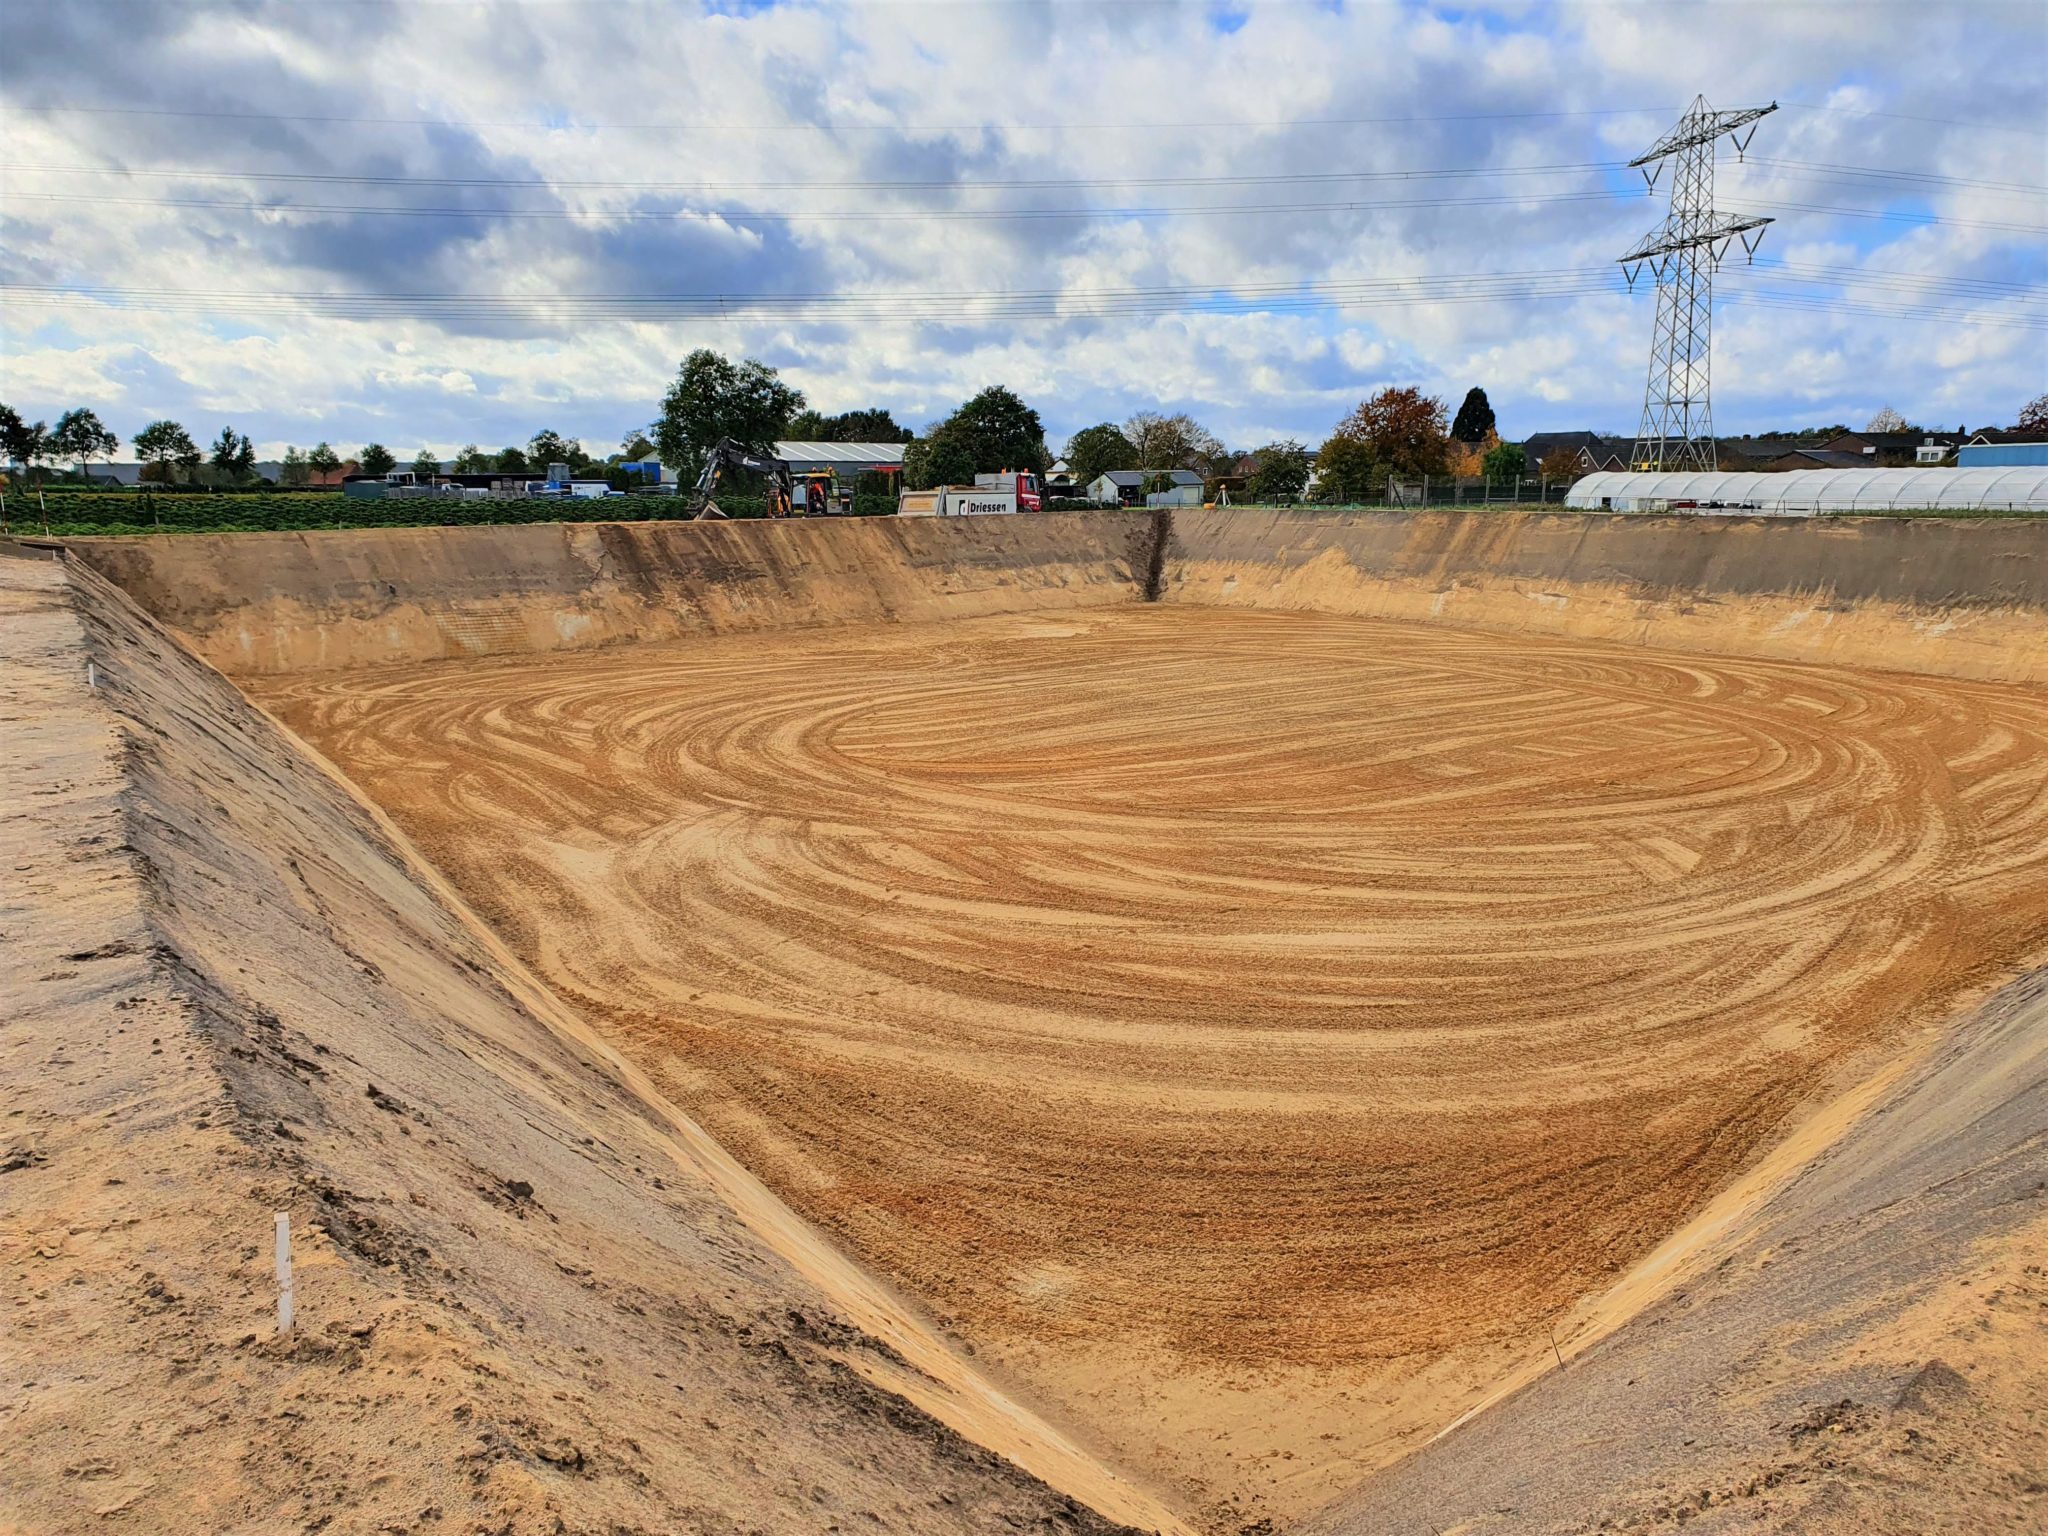 Excavated basins for blueberry growers, the Netherlands